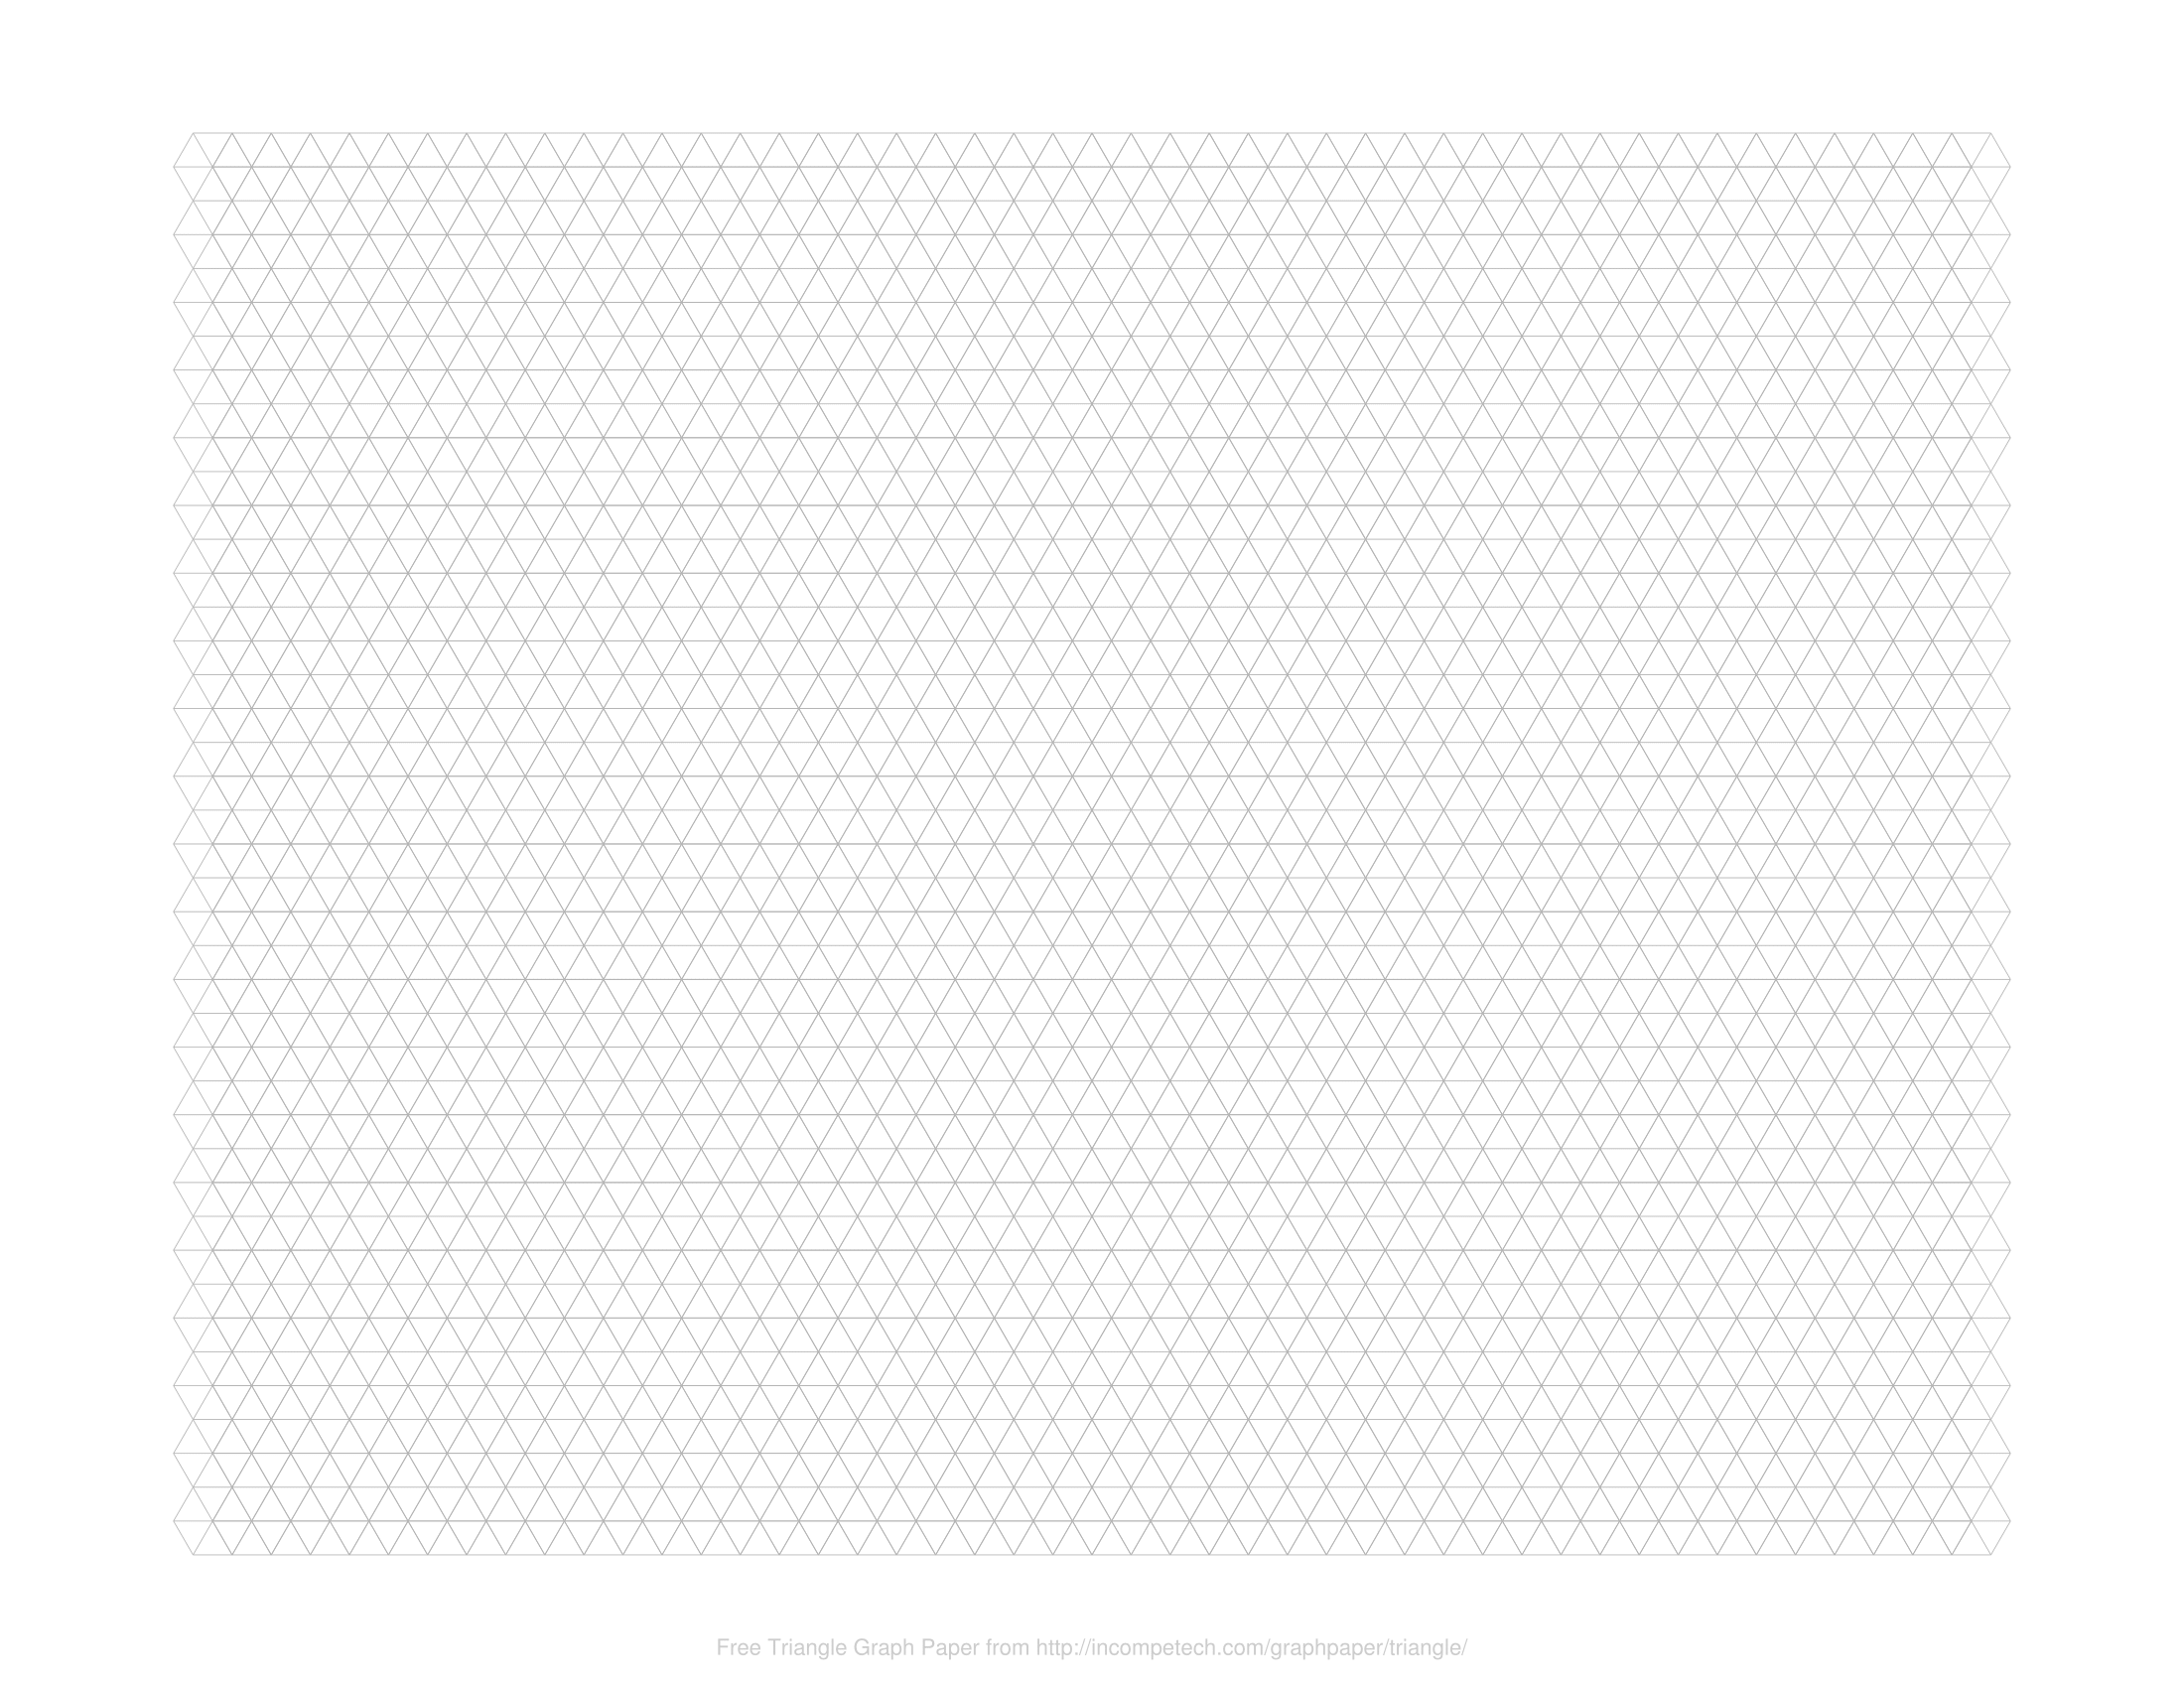 Free Online Graph Paper / Triangle